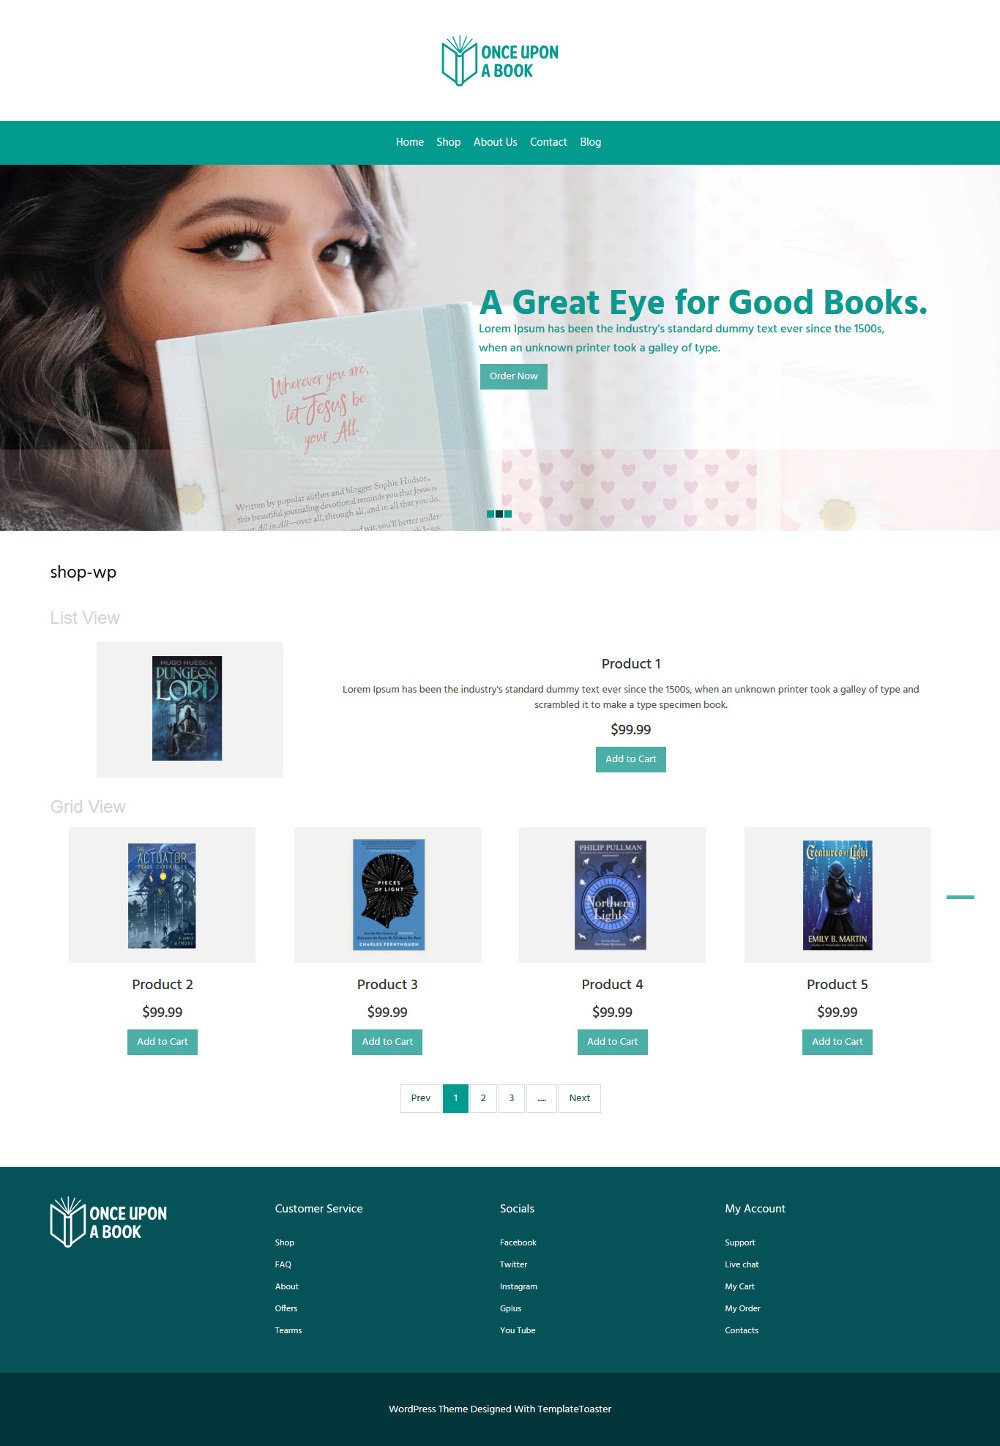 Once Upon a Book Online Book Store WooCommerce Theme